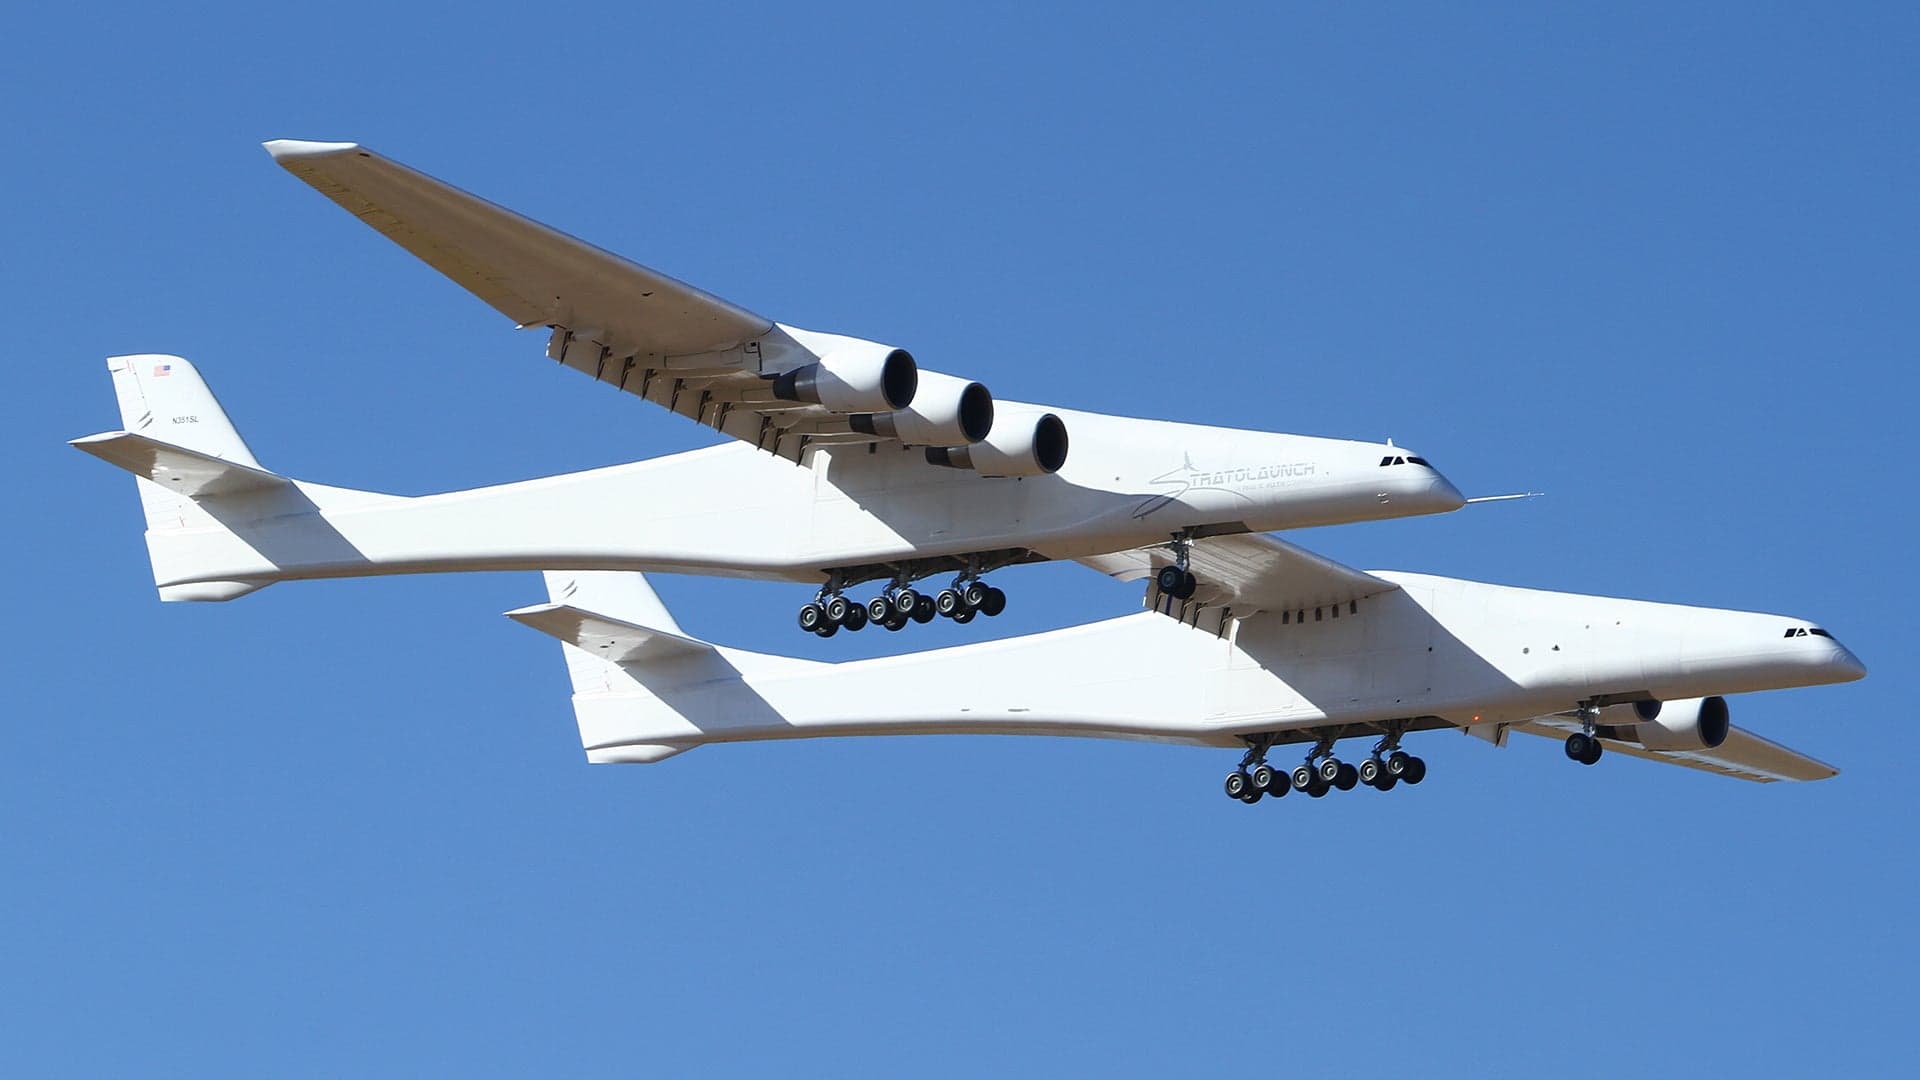 Stratolaunch’s Roc, The World’s Largest Aircraft, Has Flown For The First Time (Updated)